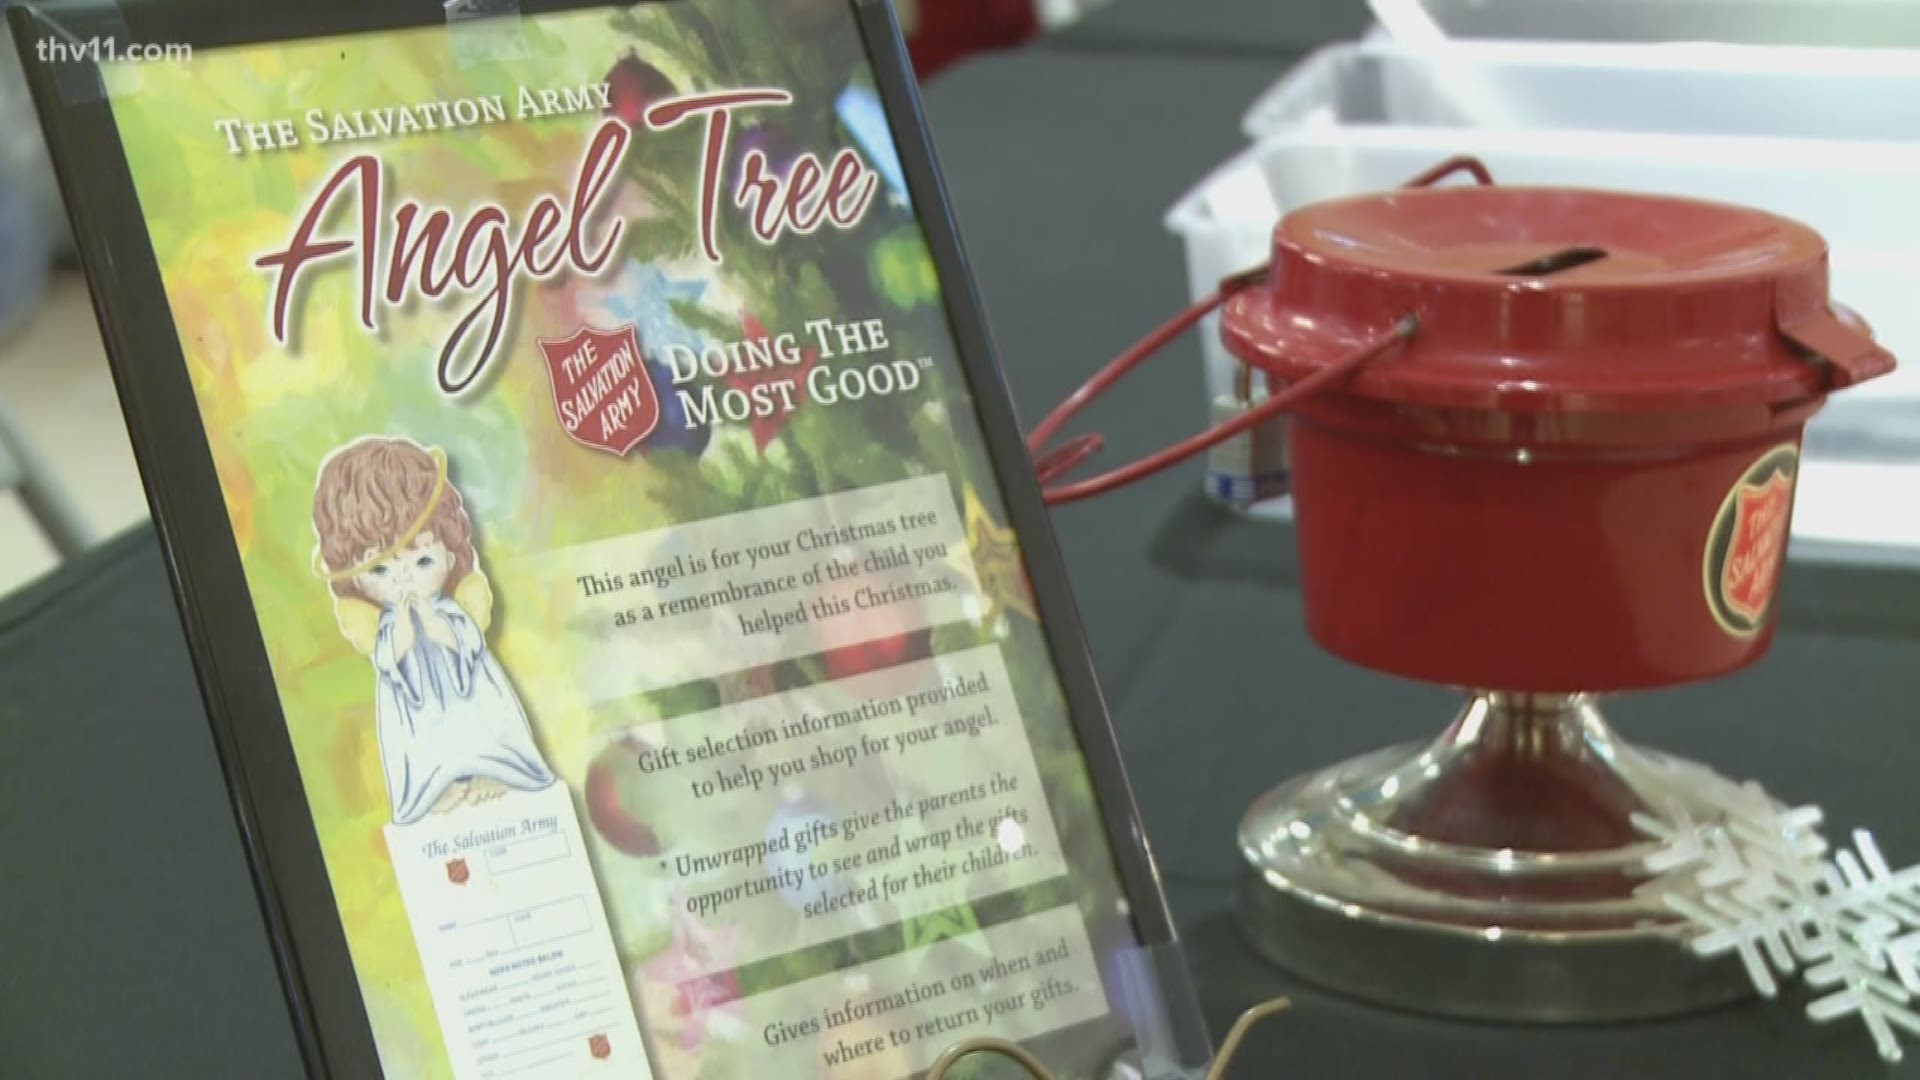 Organizers for the salvation army's angel tree program say the initiative is in need of help, now, more than ever.